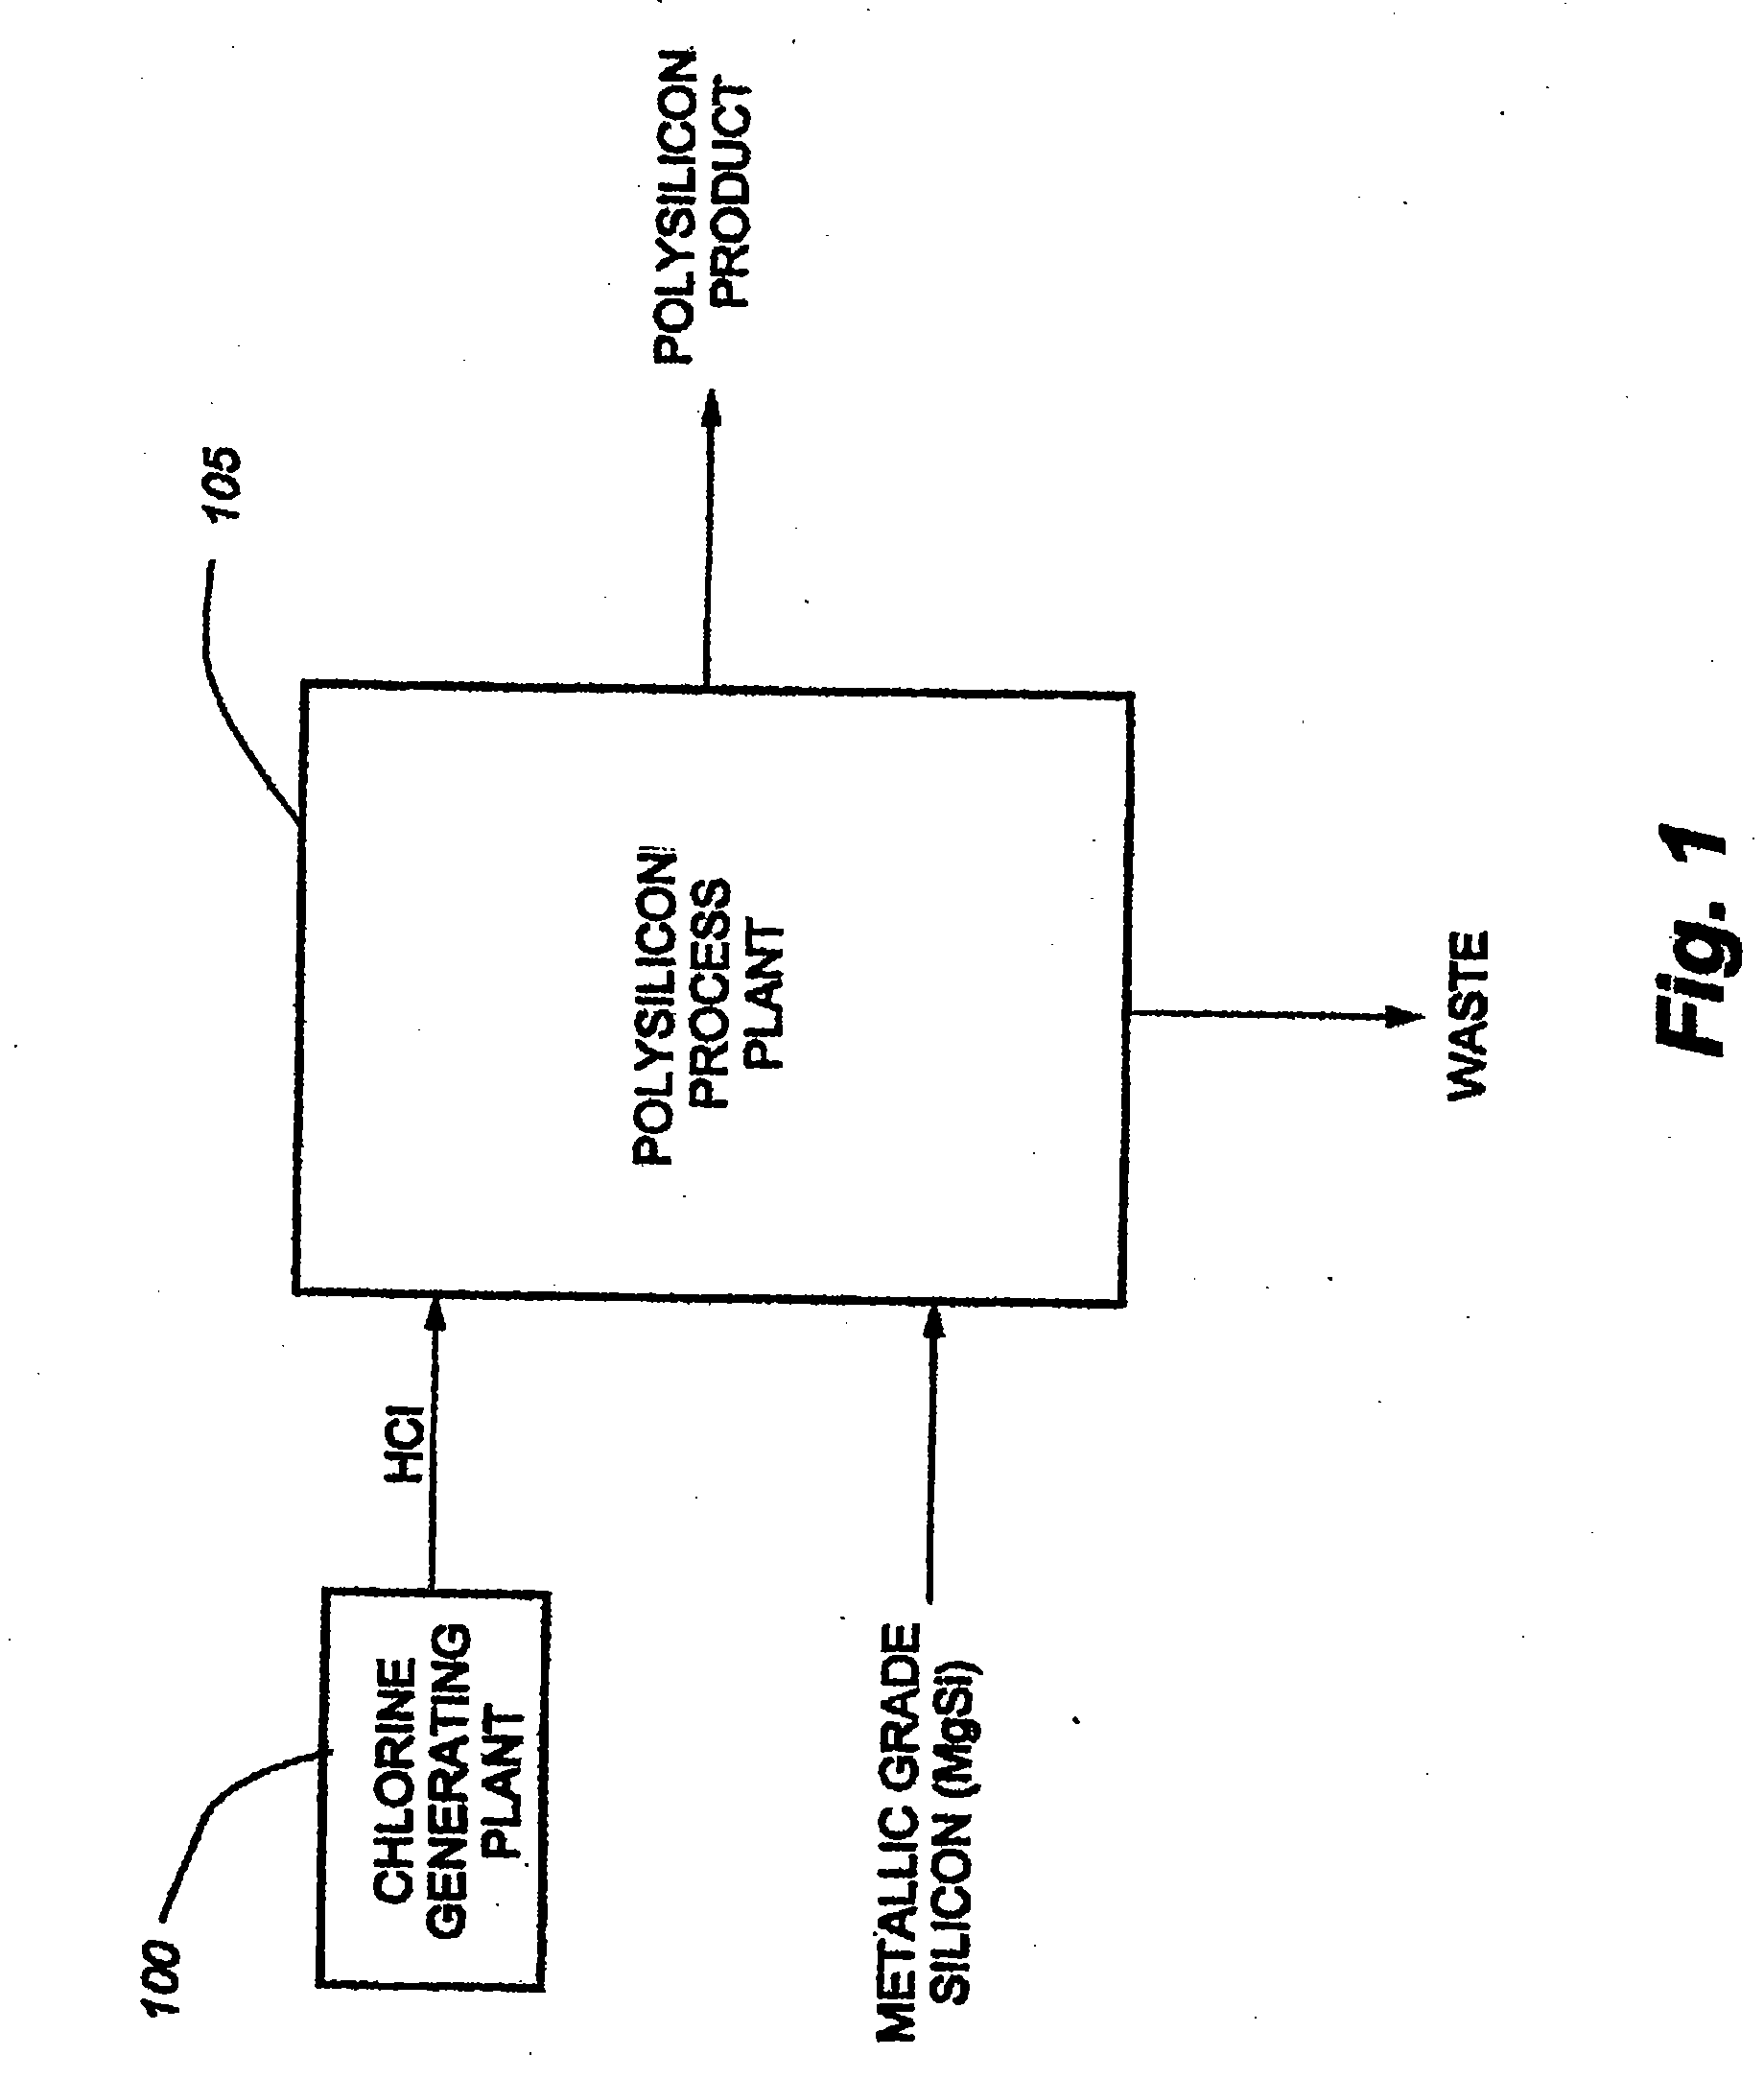 Systems and methods for supplying chlorine to and recovering chlorine from a polysilicon plant